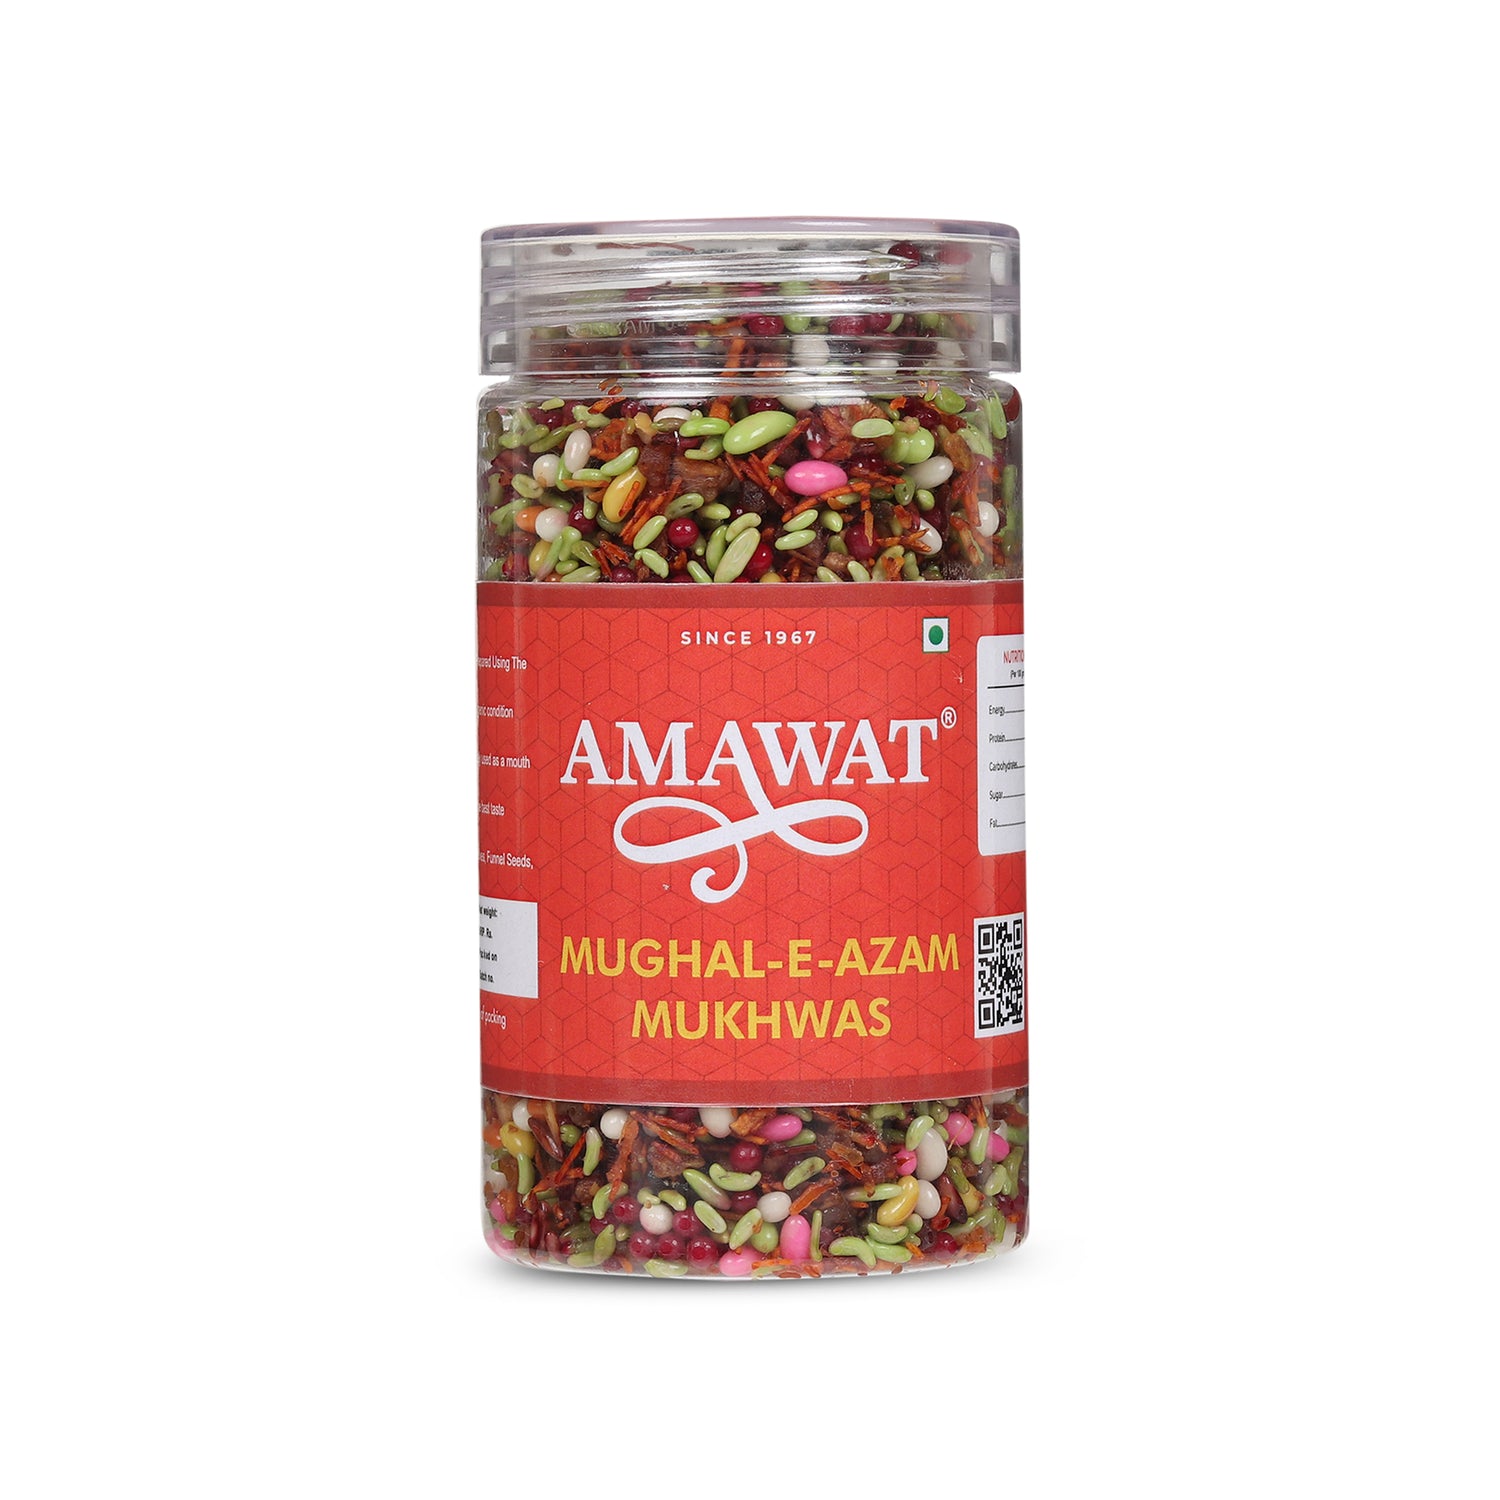 best mouth freshener Shop From amawat